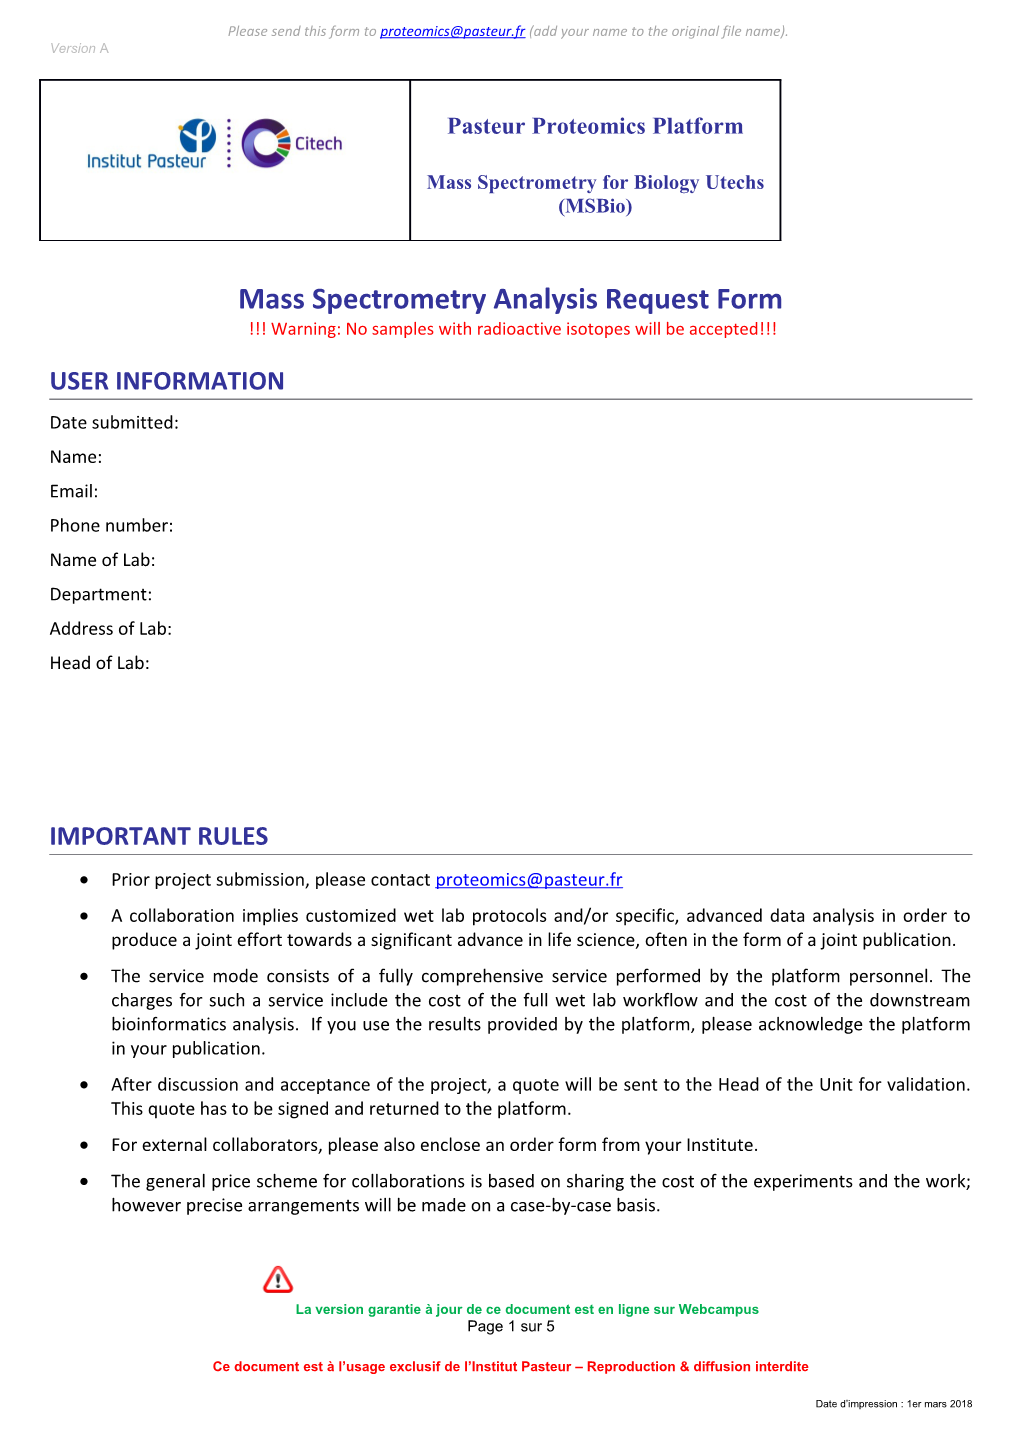 Mass Spectrometry Analysis Request Form